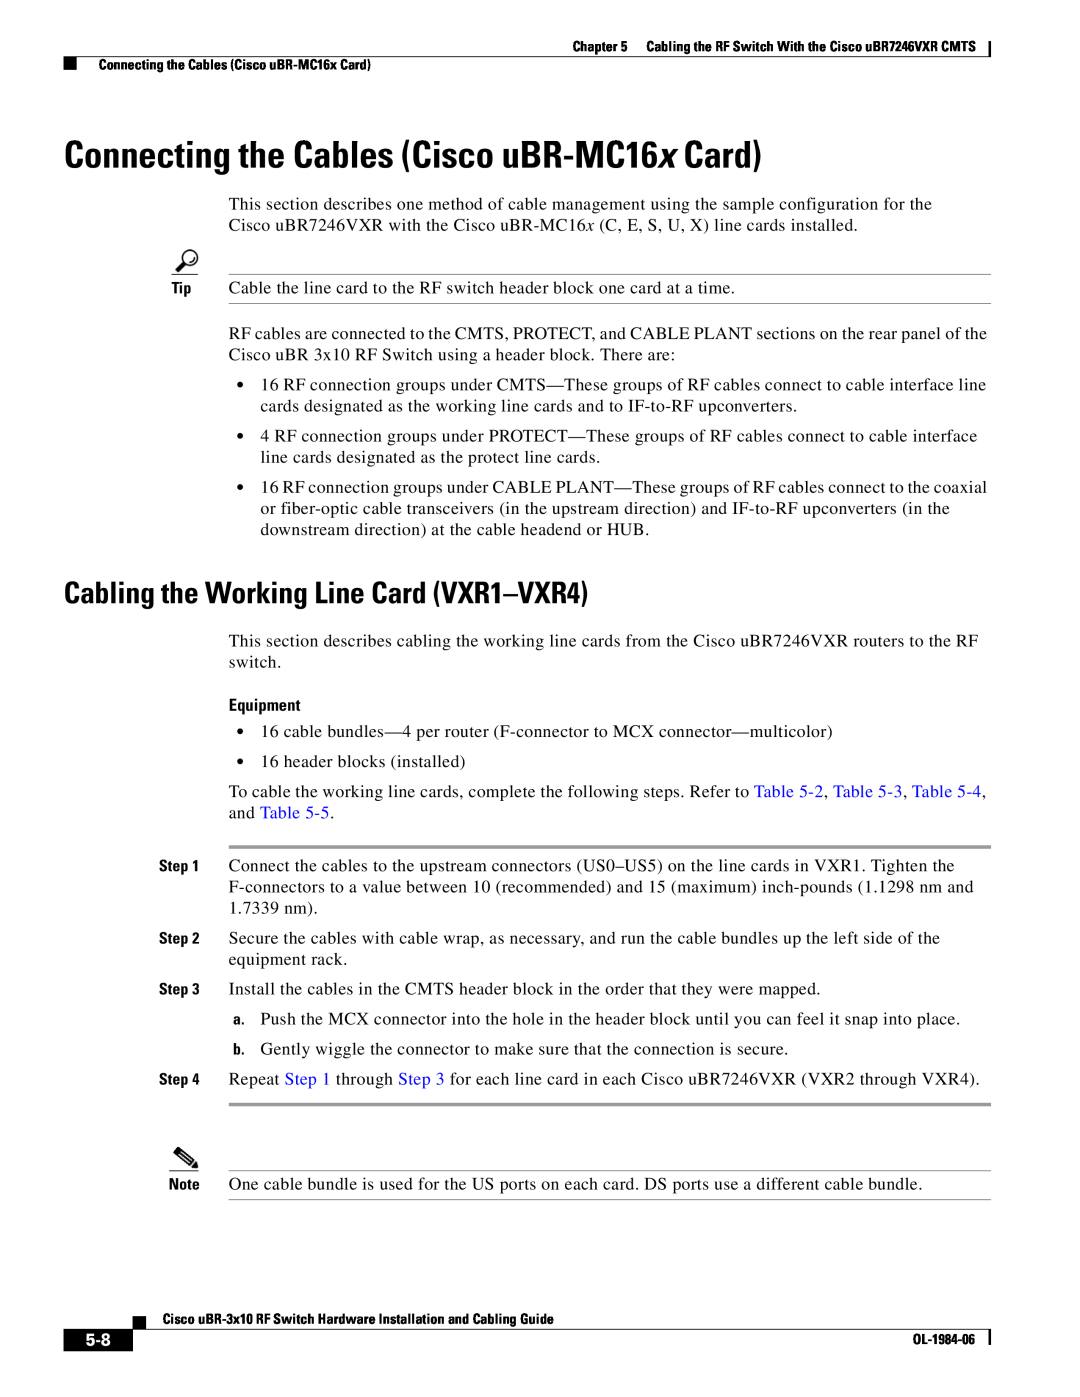 Cisco Systems UBR-3X10 manual Connecting the Cables Cisco uBR-MC16x Card, Cabling the Working Line Card VXR1-VXR4 